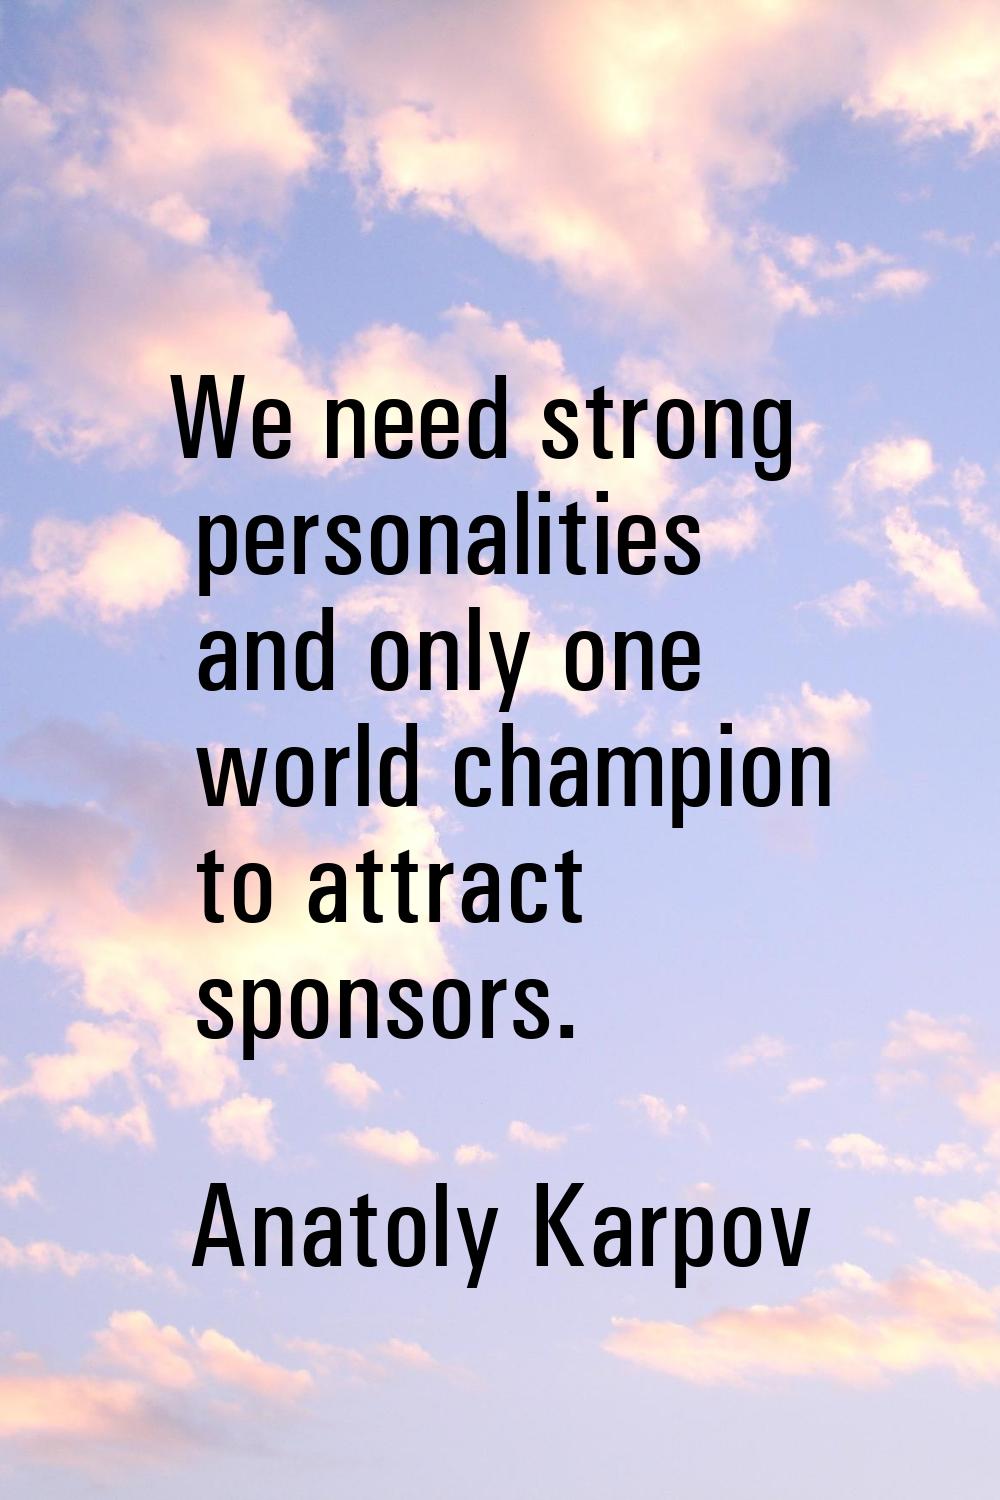 We need strong personalities and only one world champion to attract sponsors.